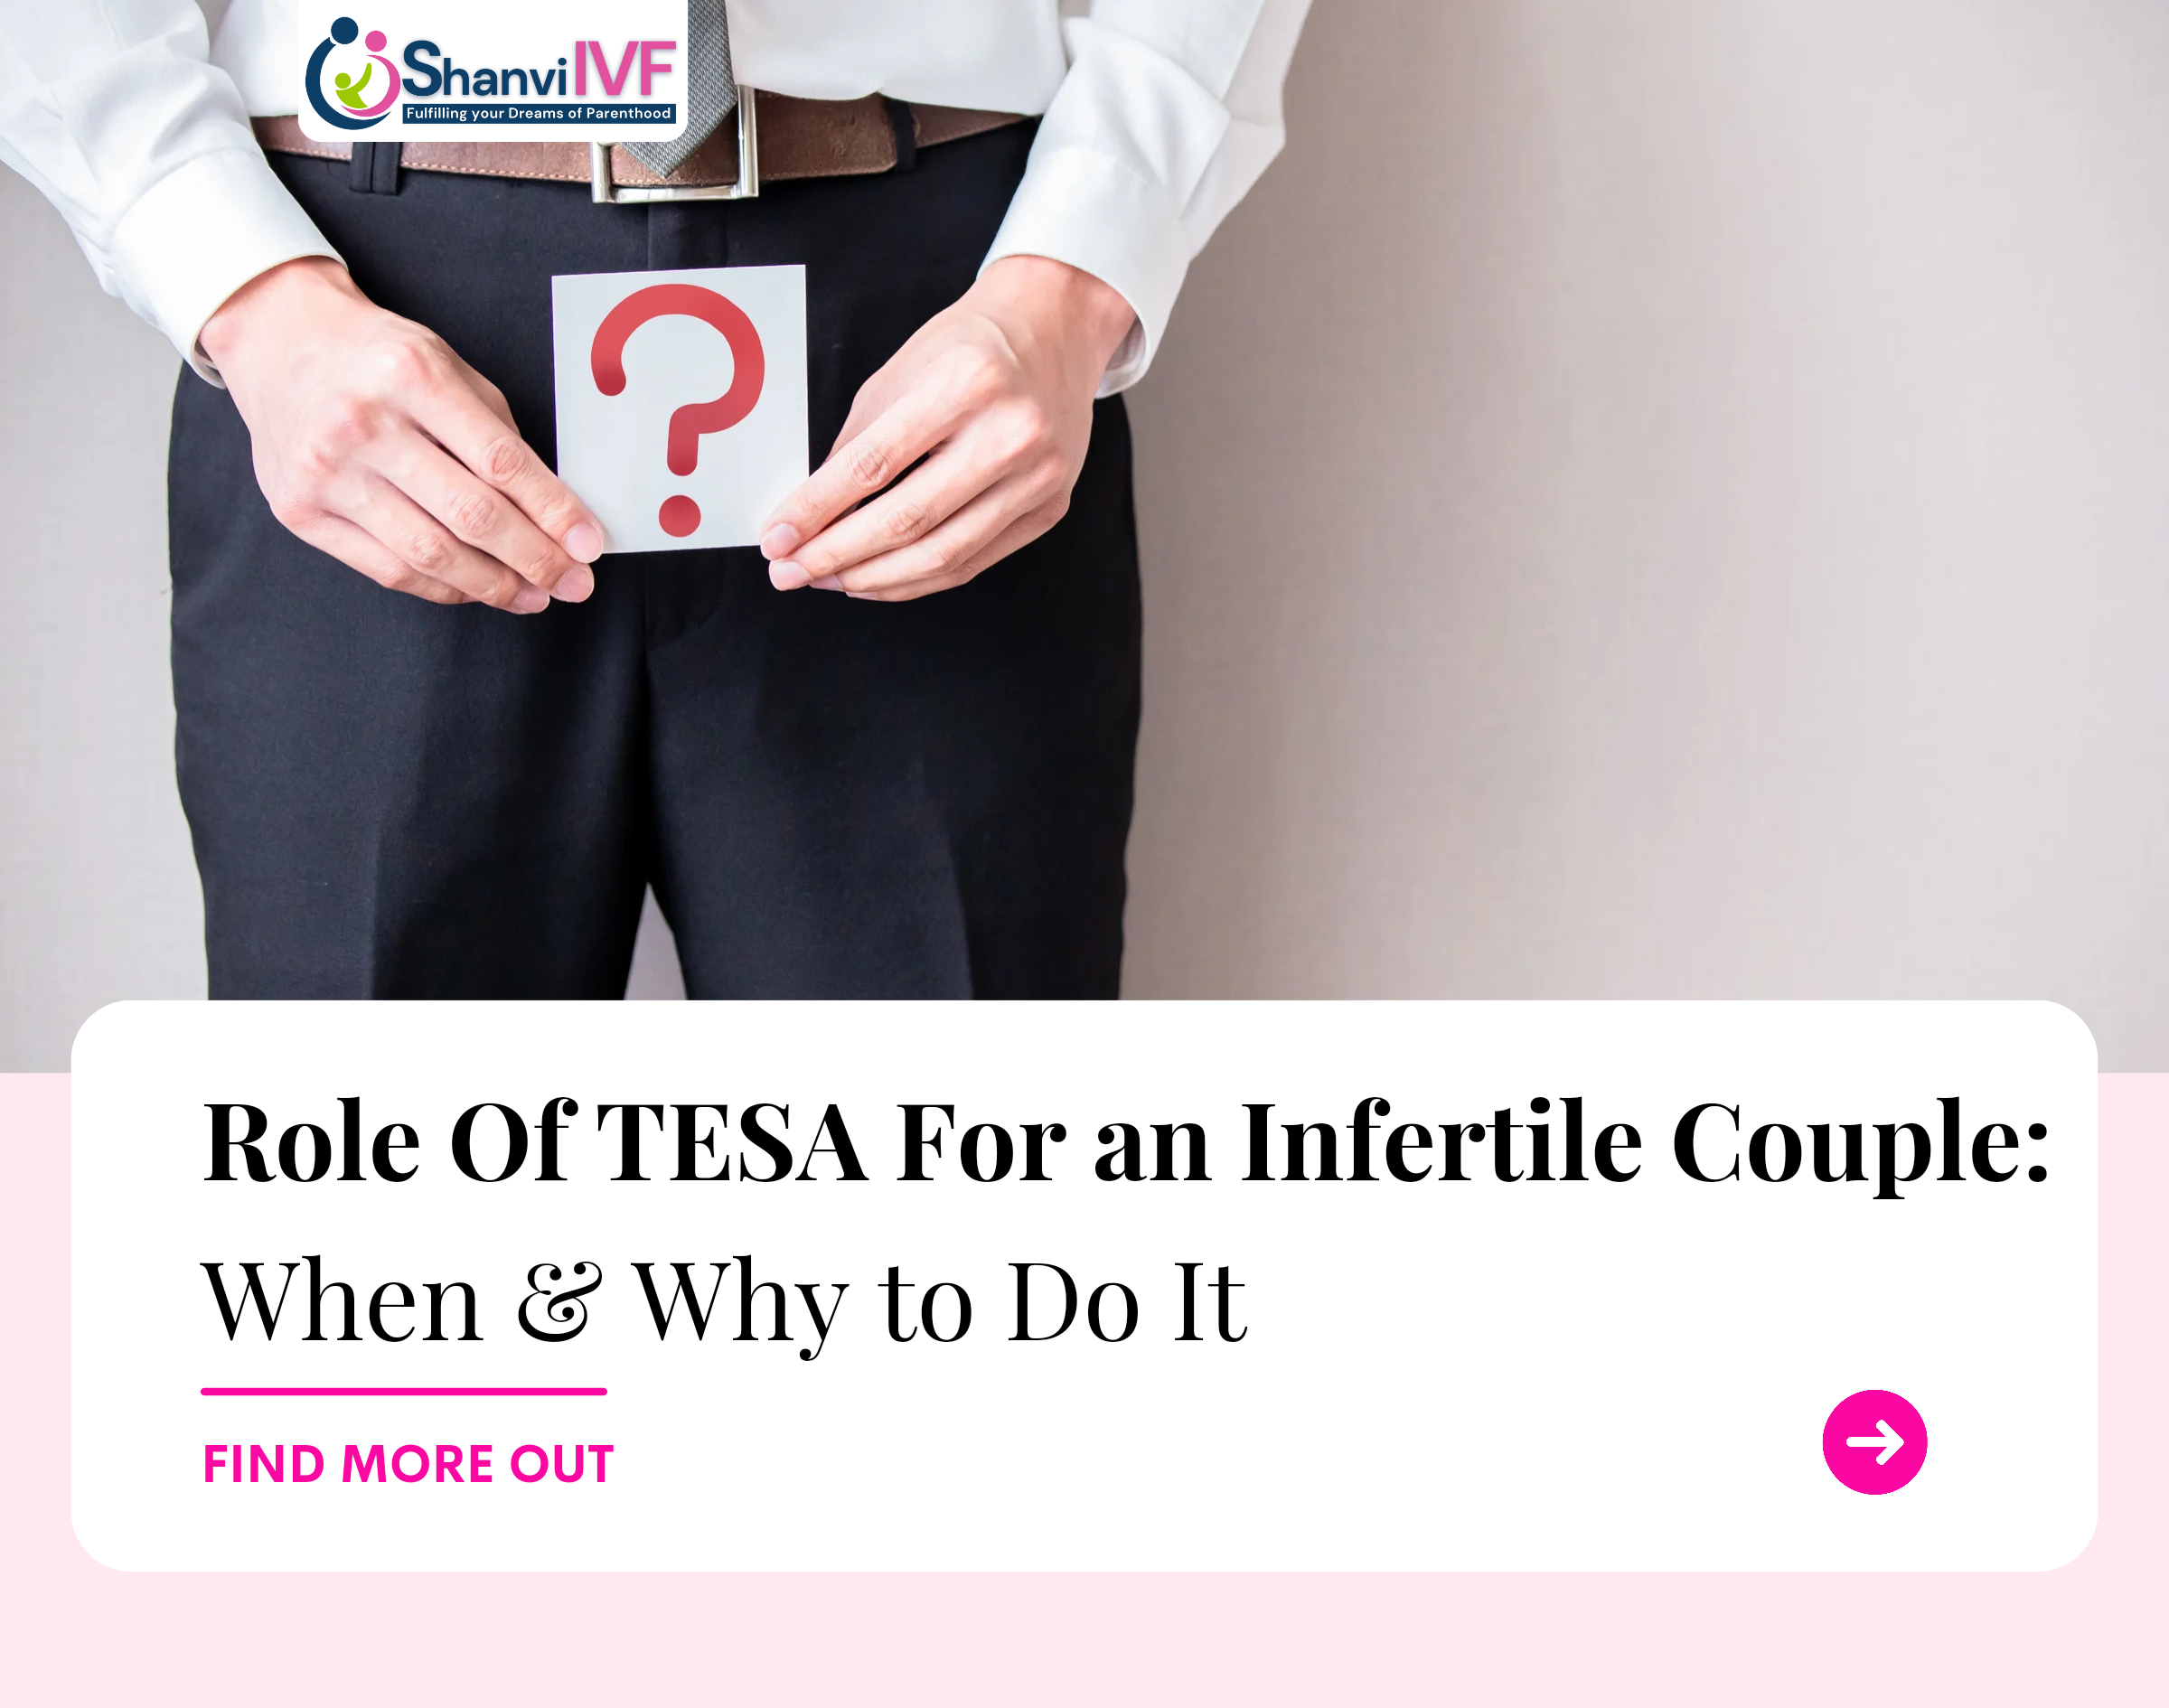 Role Of TESA For an Infertile Couple: When & Why to Do It